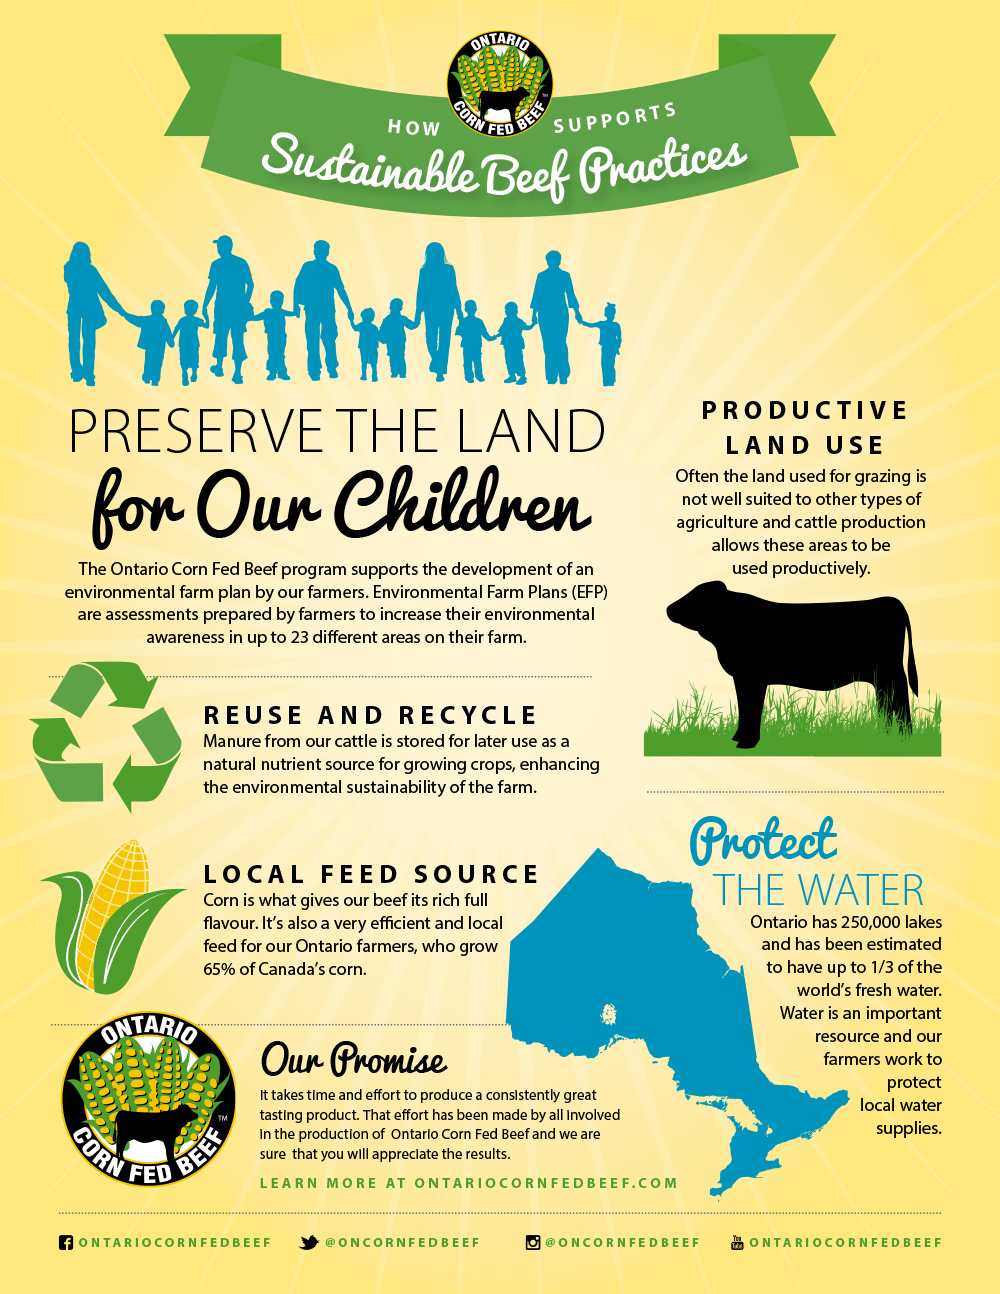 What is OCFB? - Ontario Corn Fed Beef